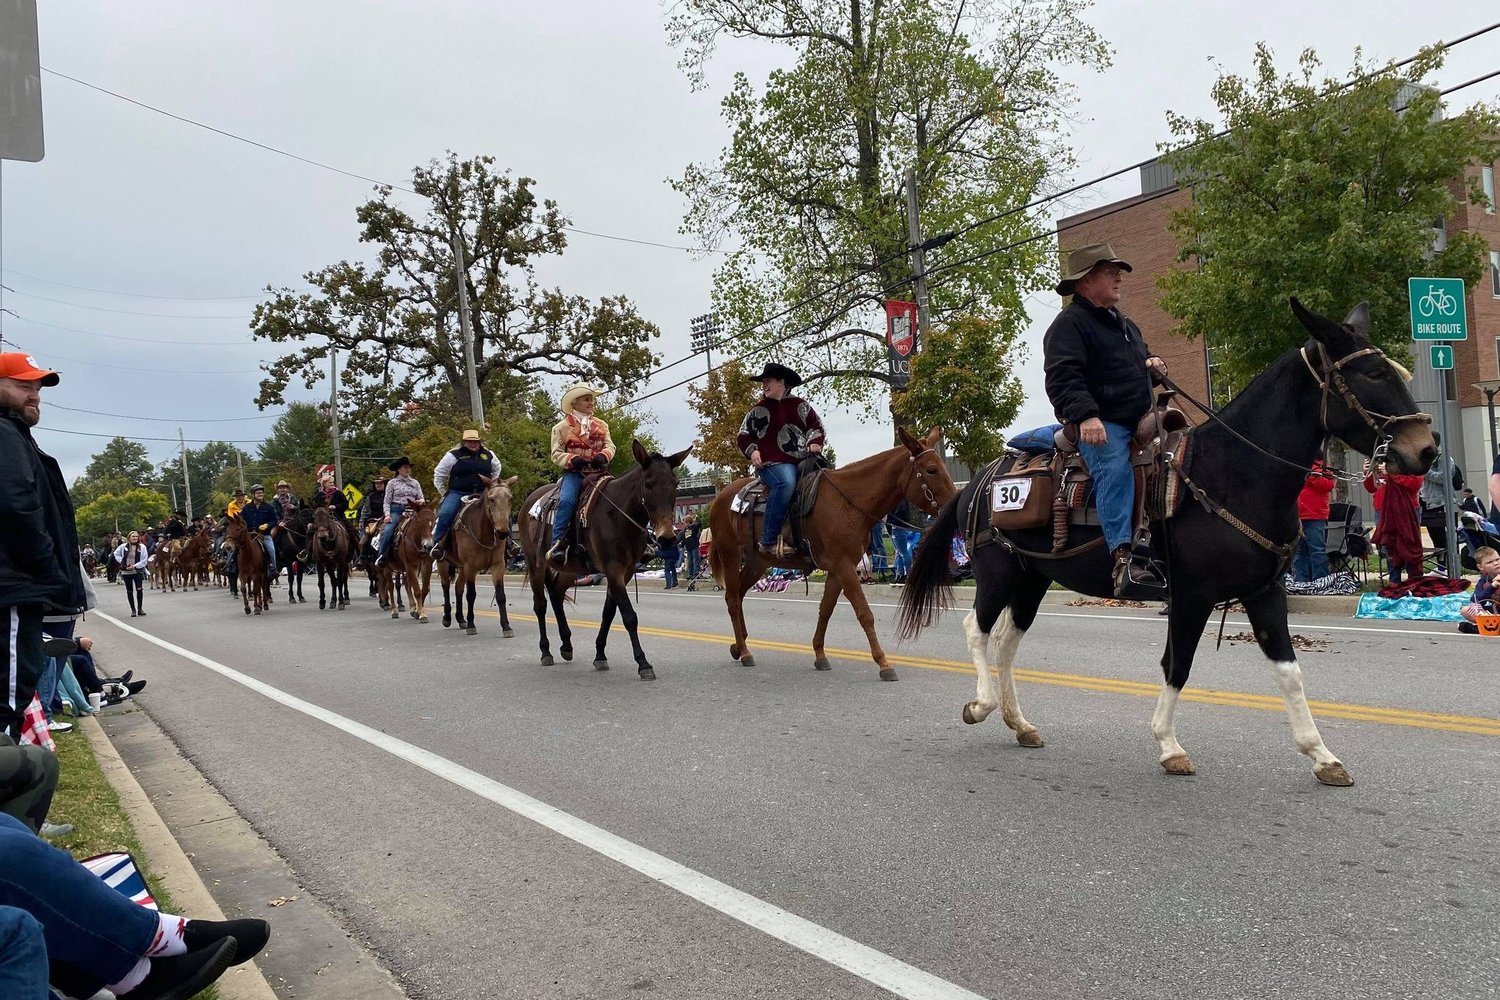 Mules and riders travel the path of the University of Central Missouri Homecoming parade Oct. 23.